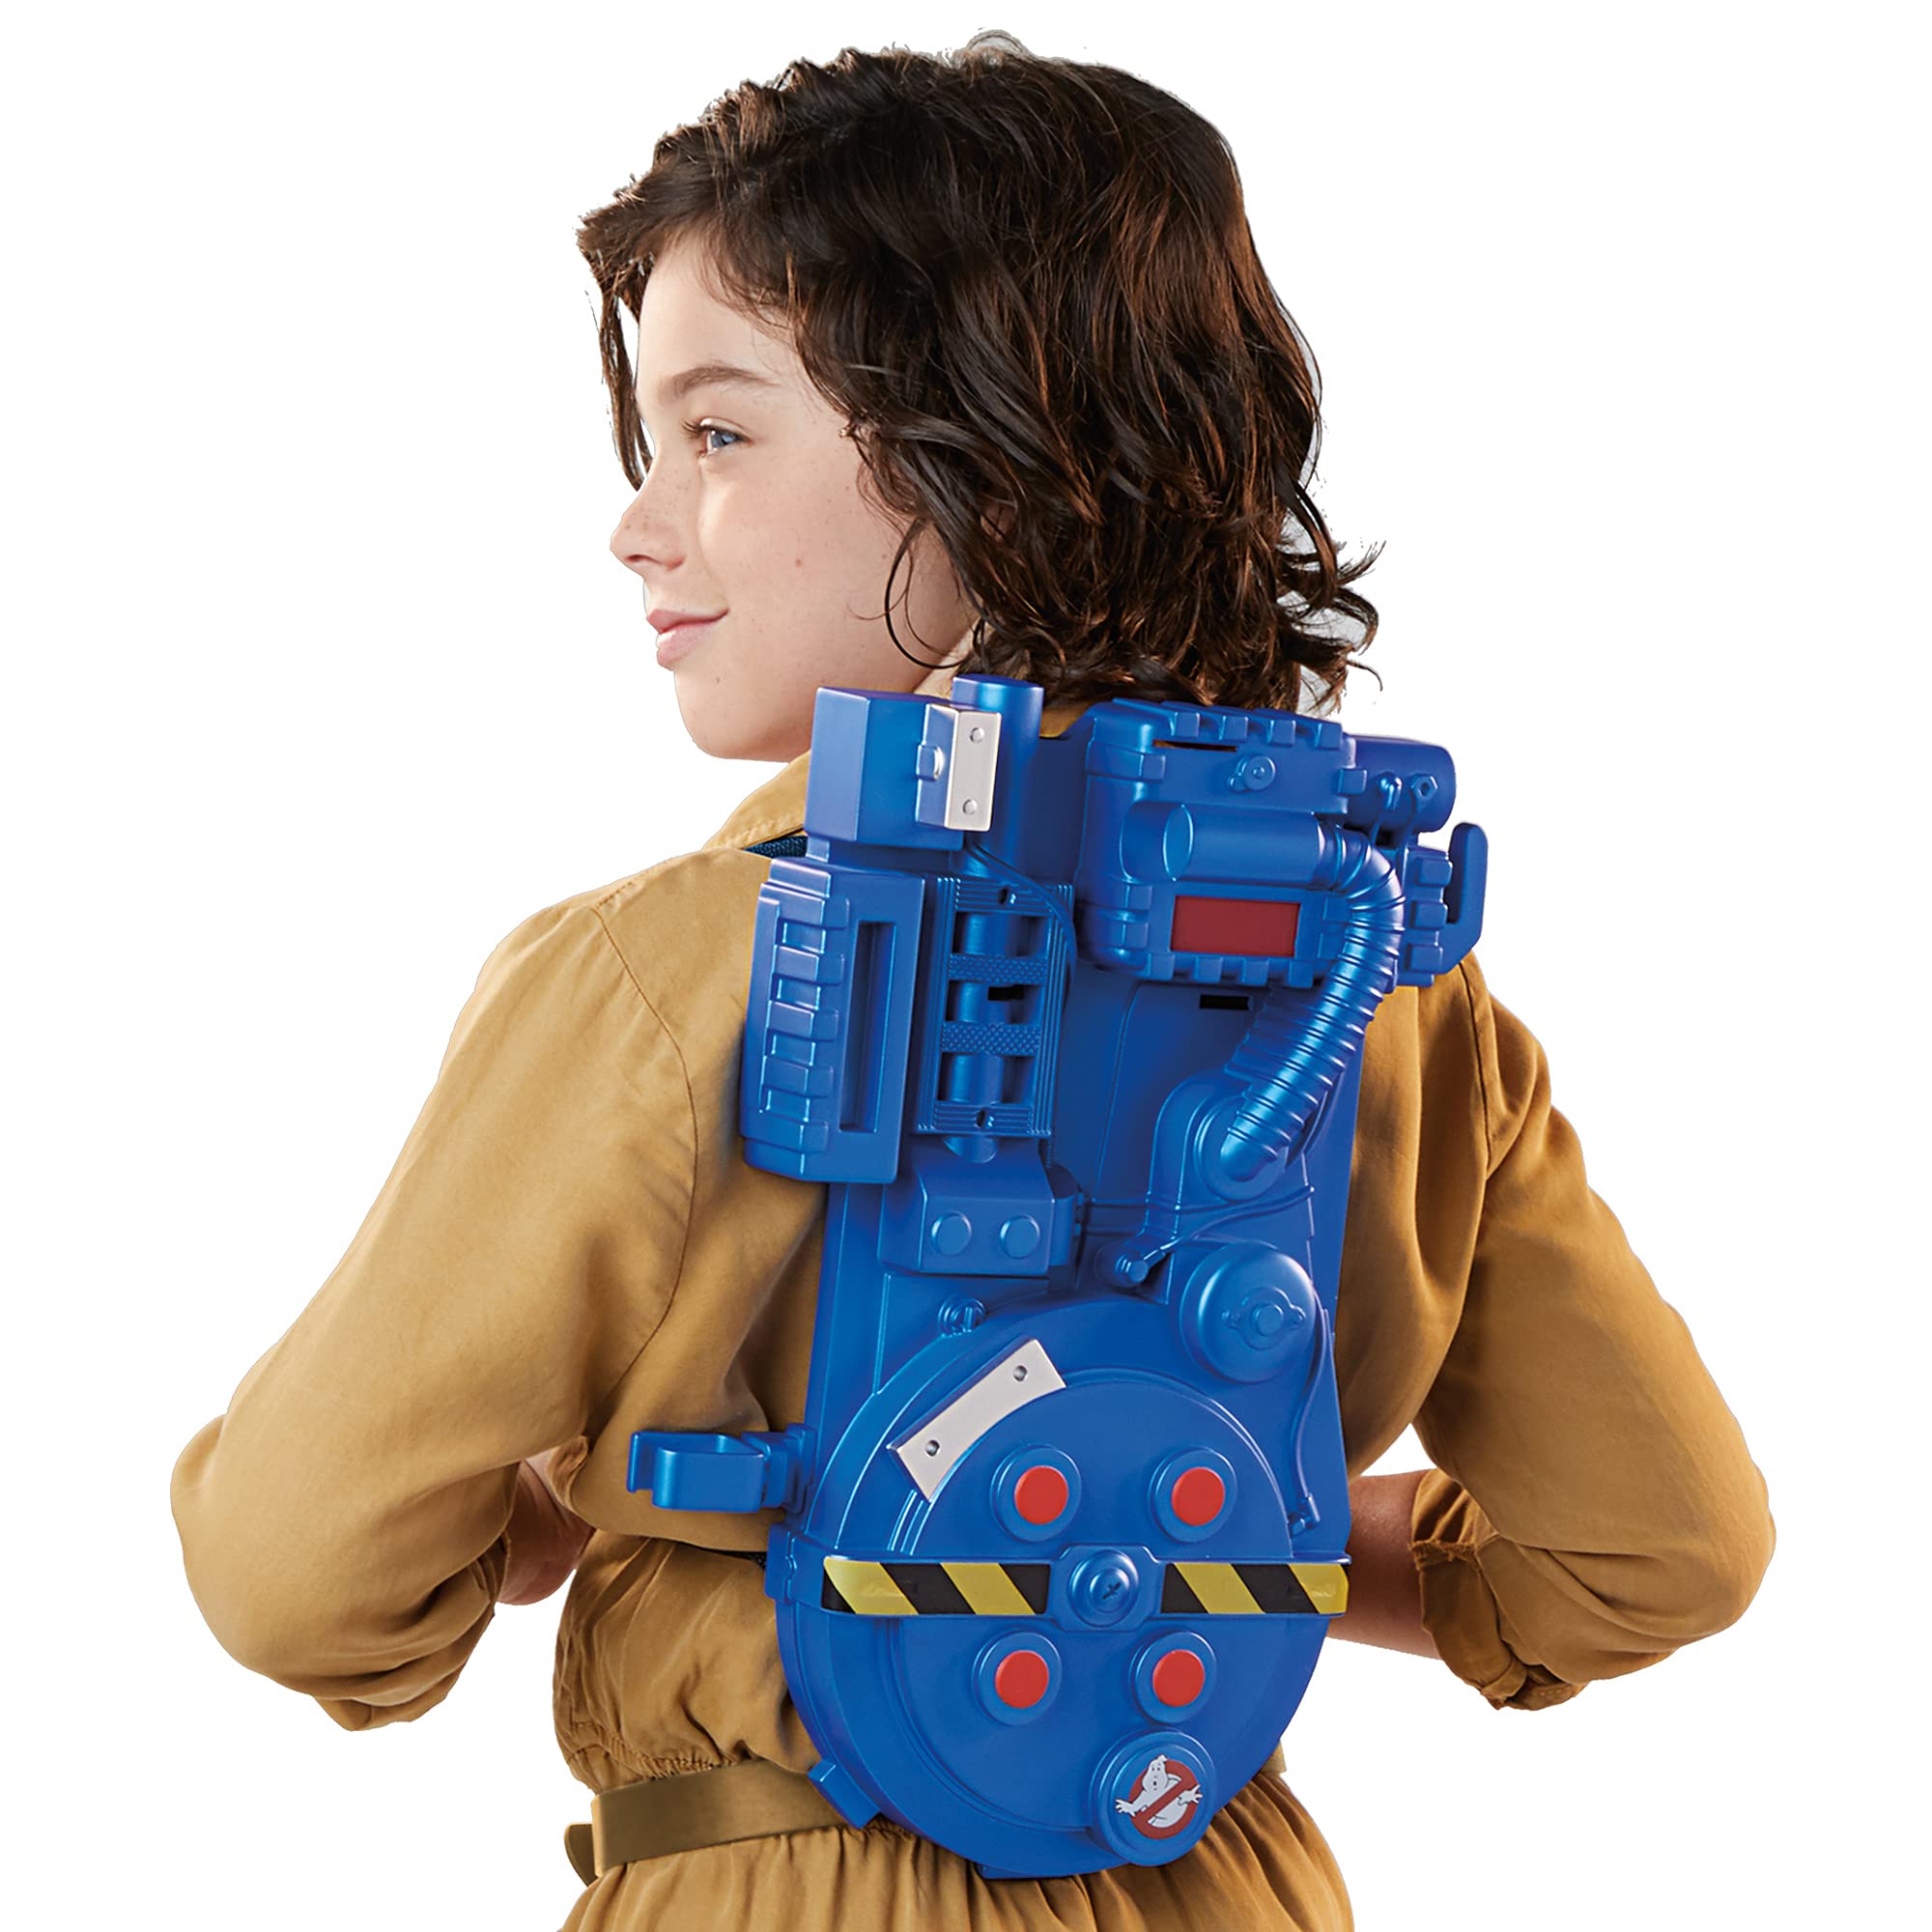 Ghostbusters Hasbro Movie Proton Pack Roleplay Gear for Kids Ages 5 and Up, Classic Blue Toy, Great Gift for Kids